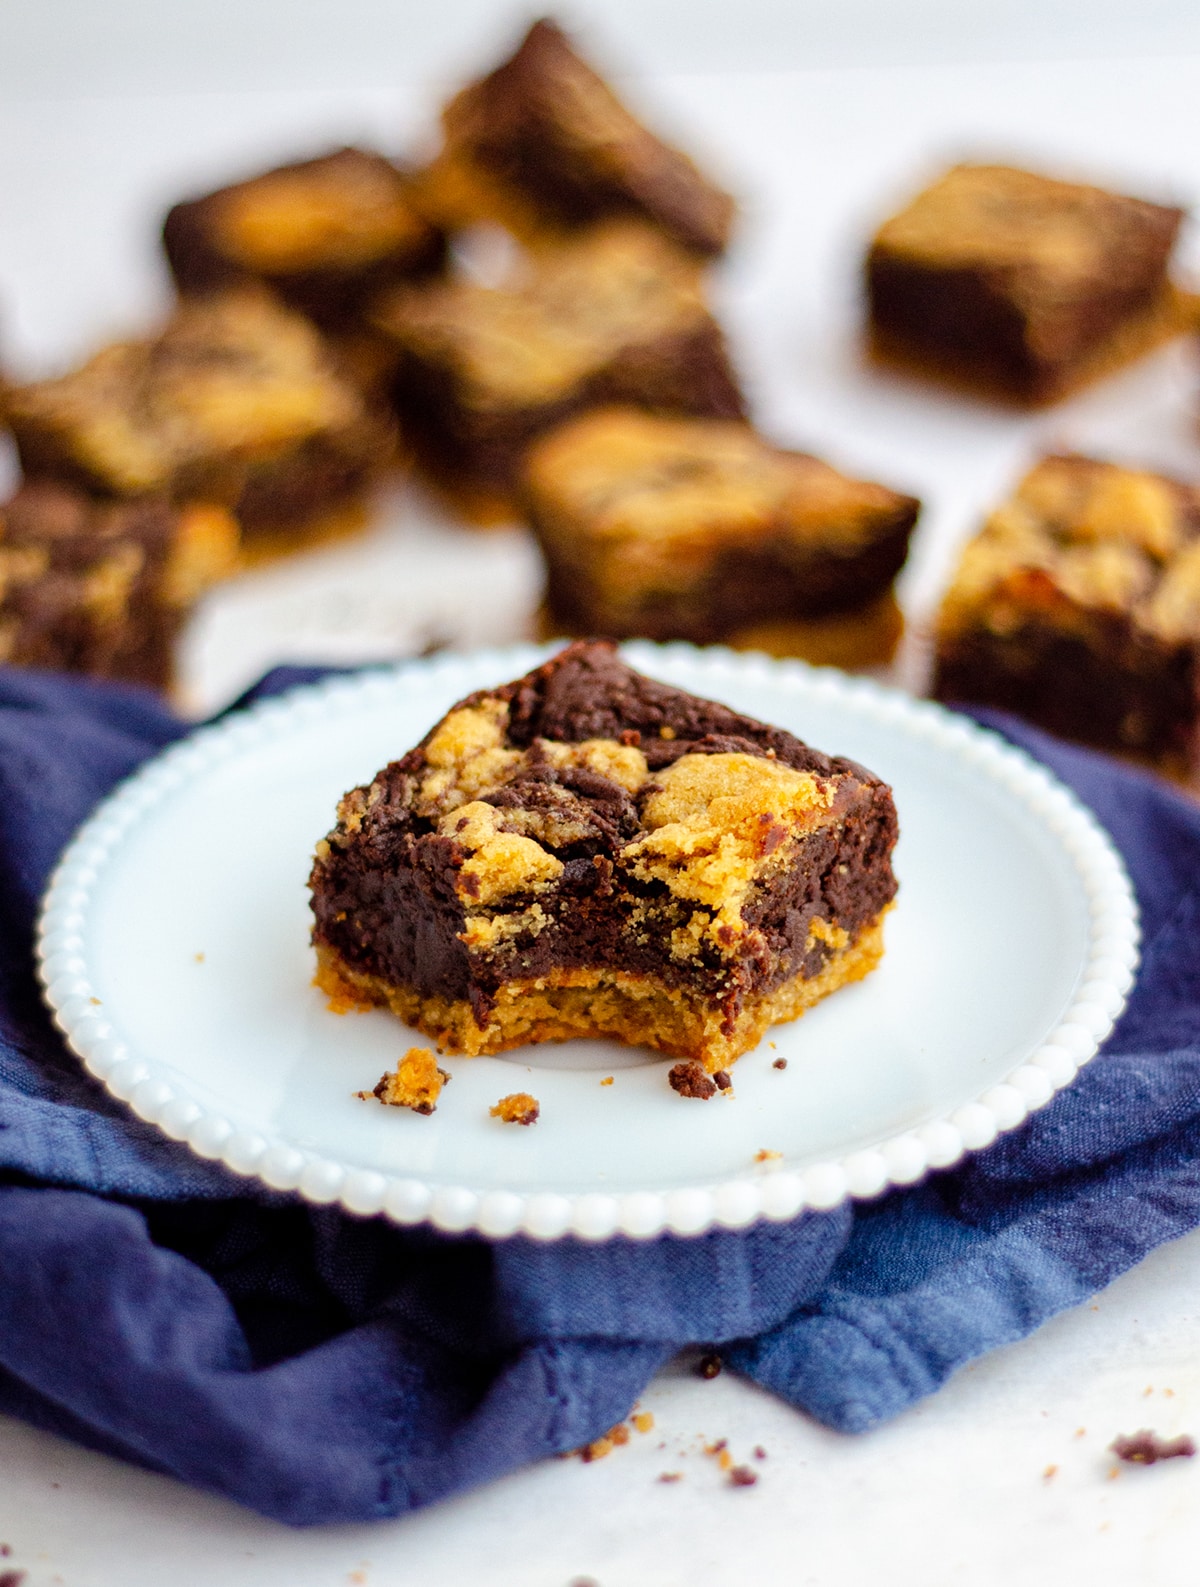 peanut butter cookie brownie sitting on a plate with a bite taken out of it and more brownies in the background